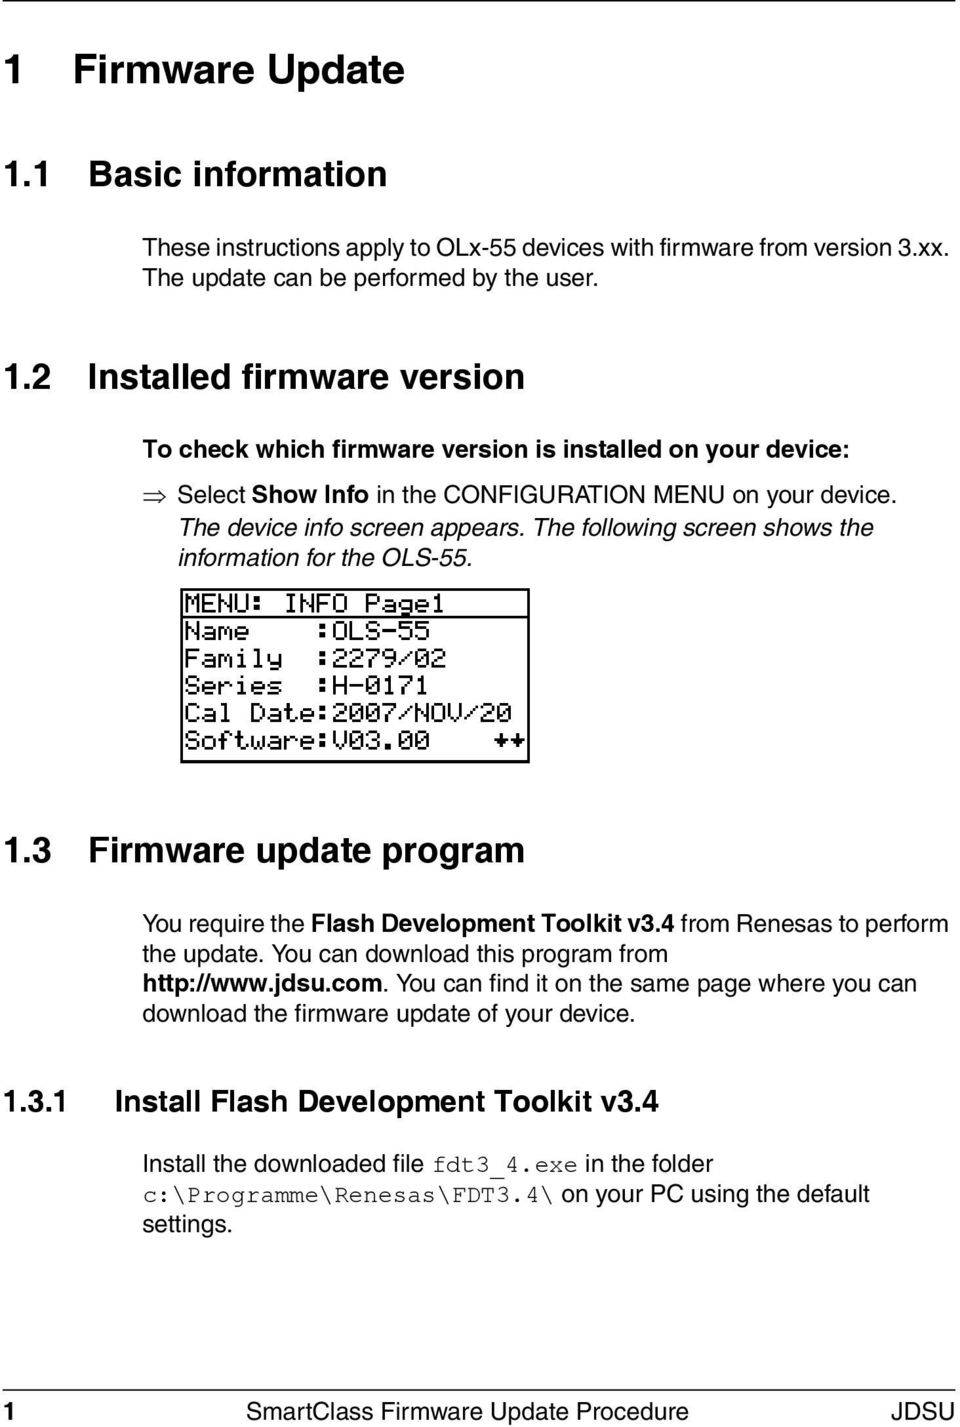 4 from Renesas to perform the update. You can download this program from http://www.jdsu.com. You can find it on the same page where you can download the firmware update of your device. 1.3.